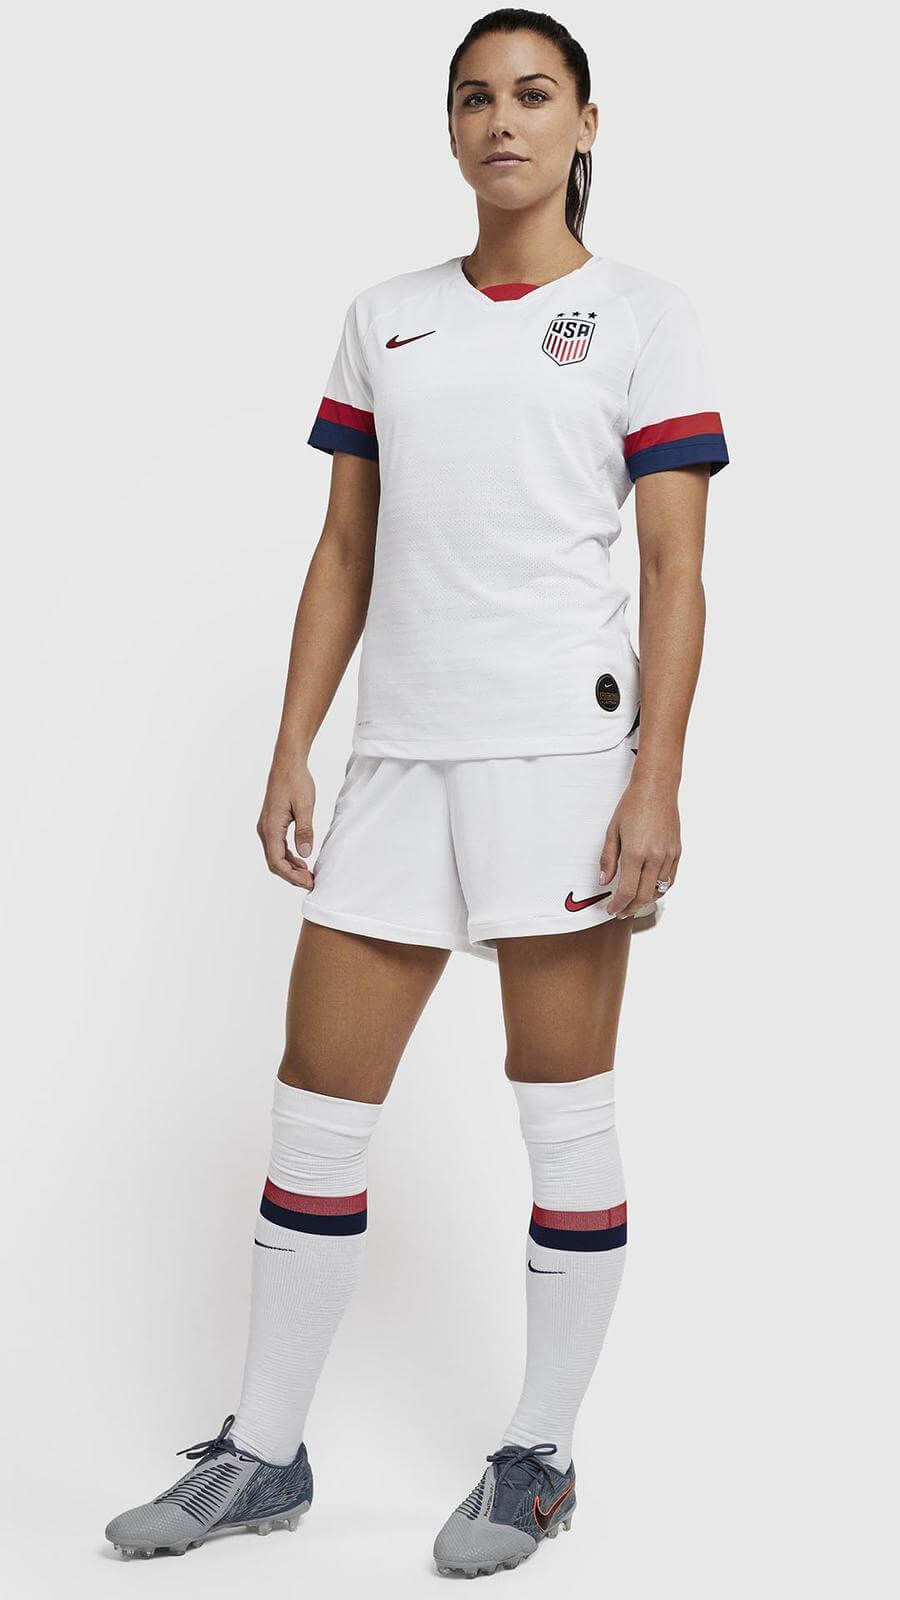 Download United States 2019 Women's World Cup Nike Home Kit | 18/19 ...